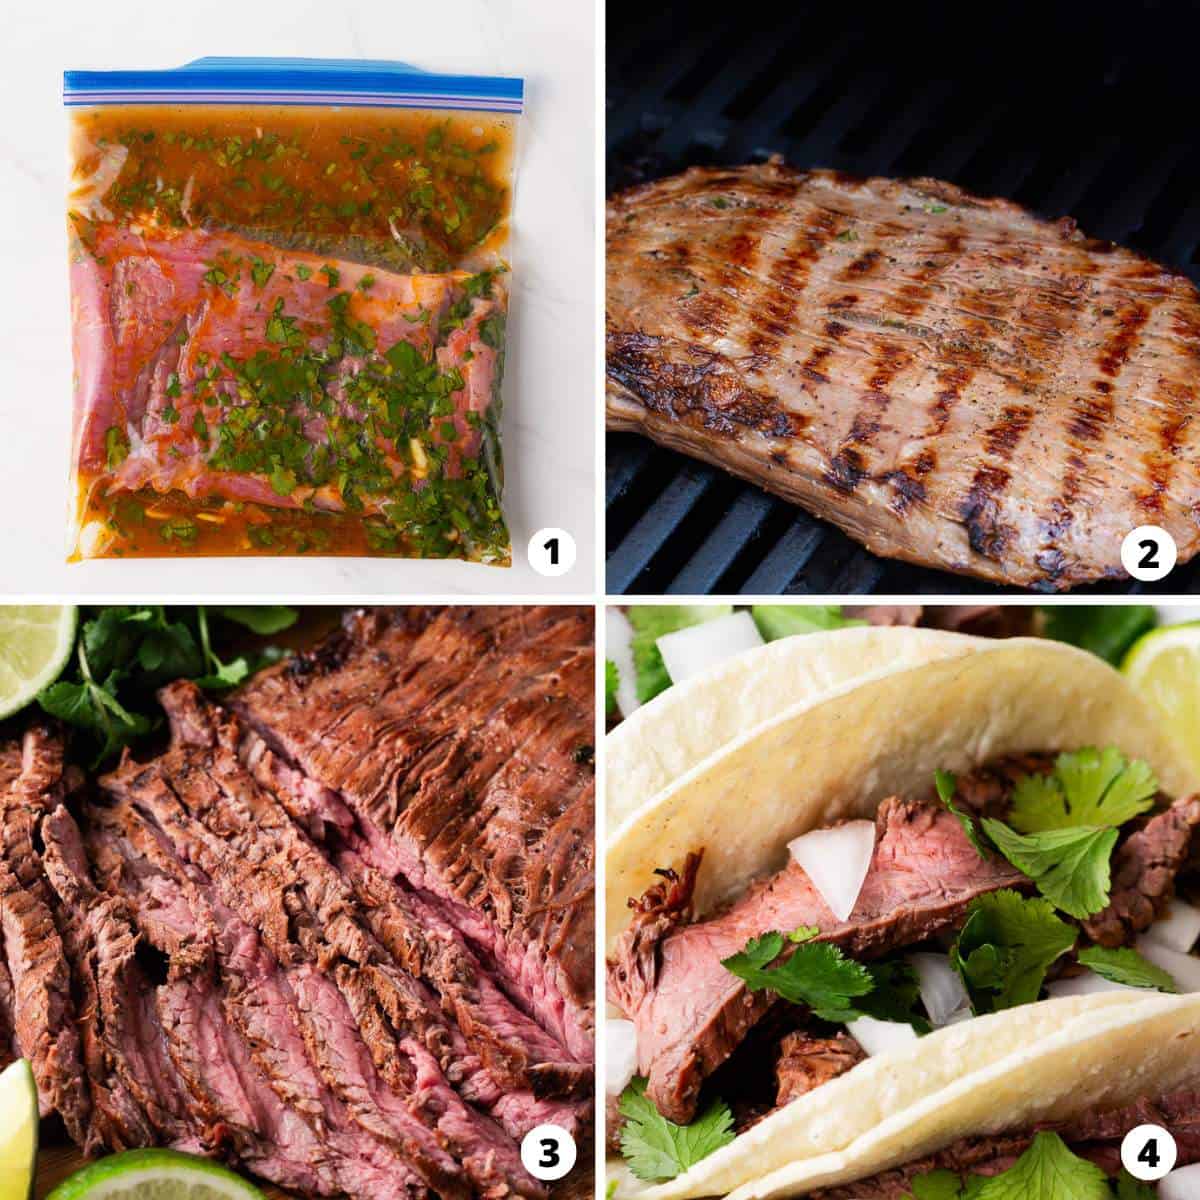 Showing how to make carne asada tacos in a 4 step collage.